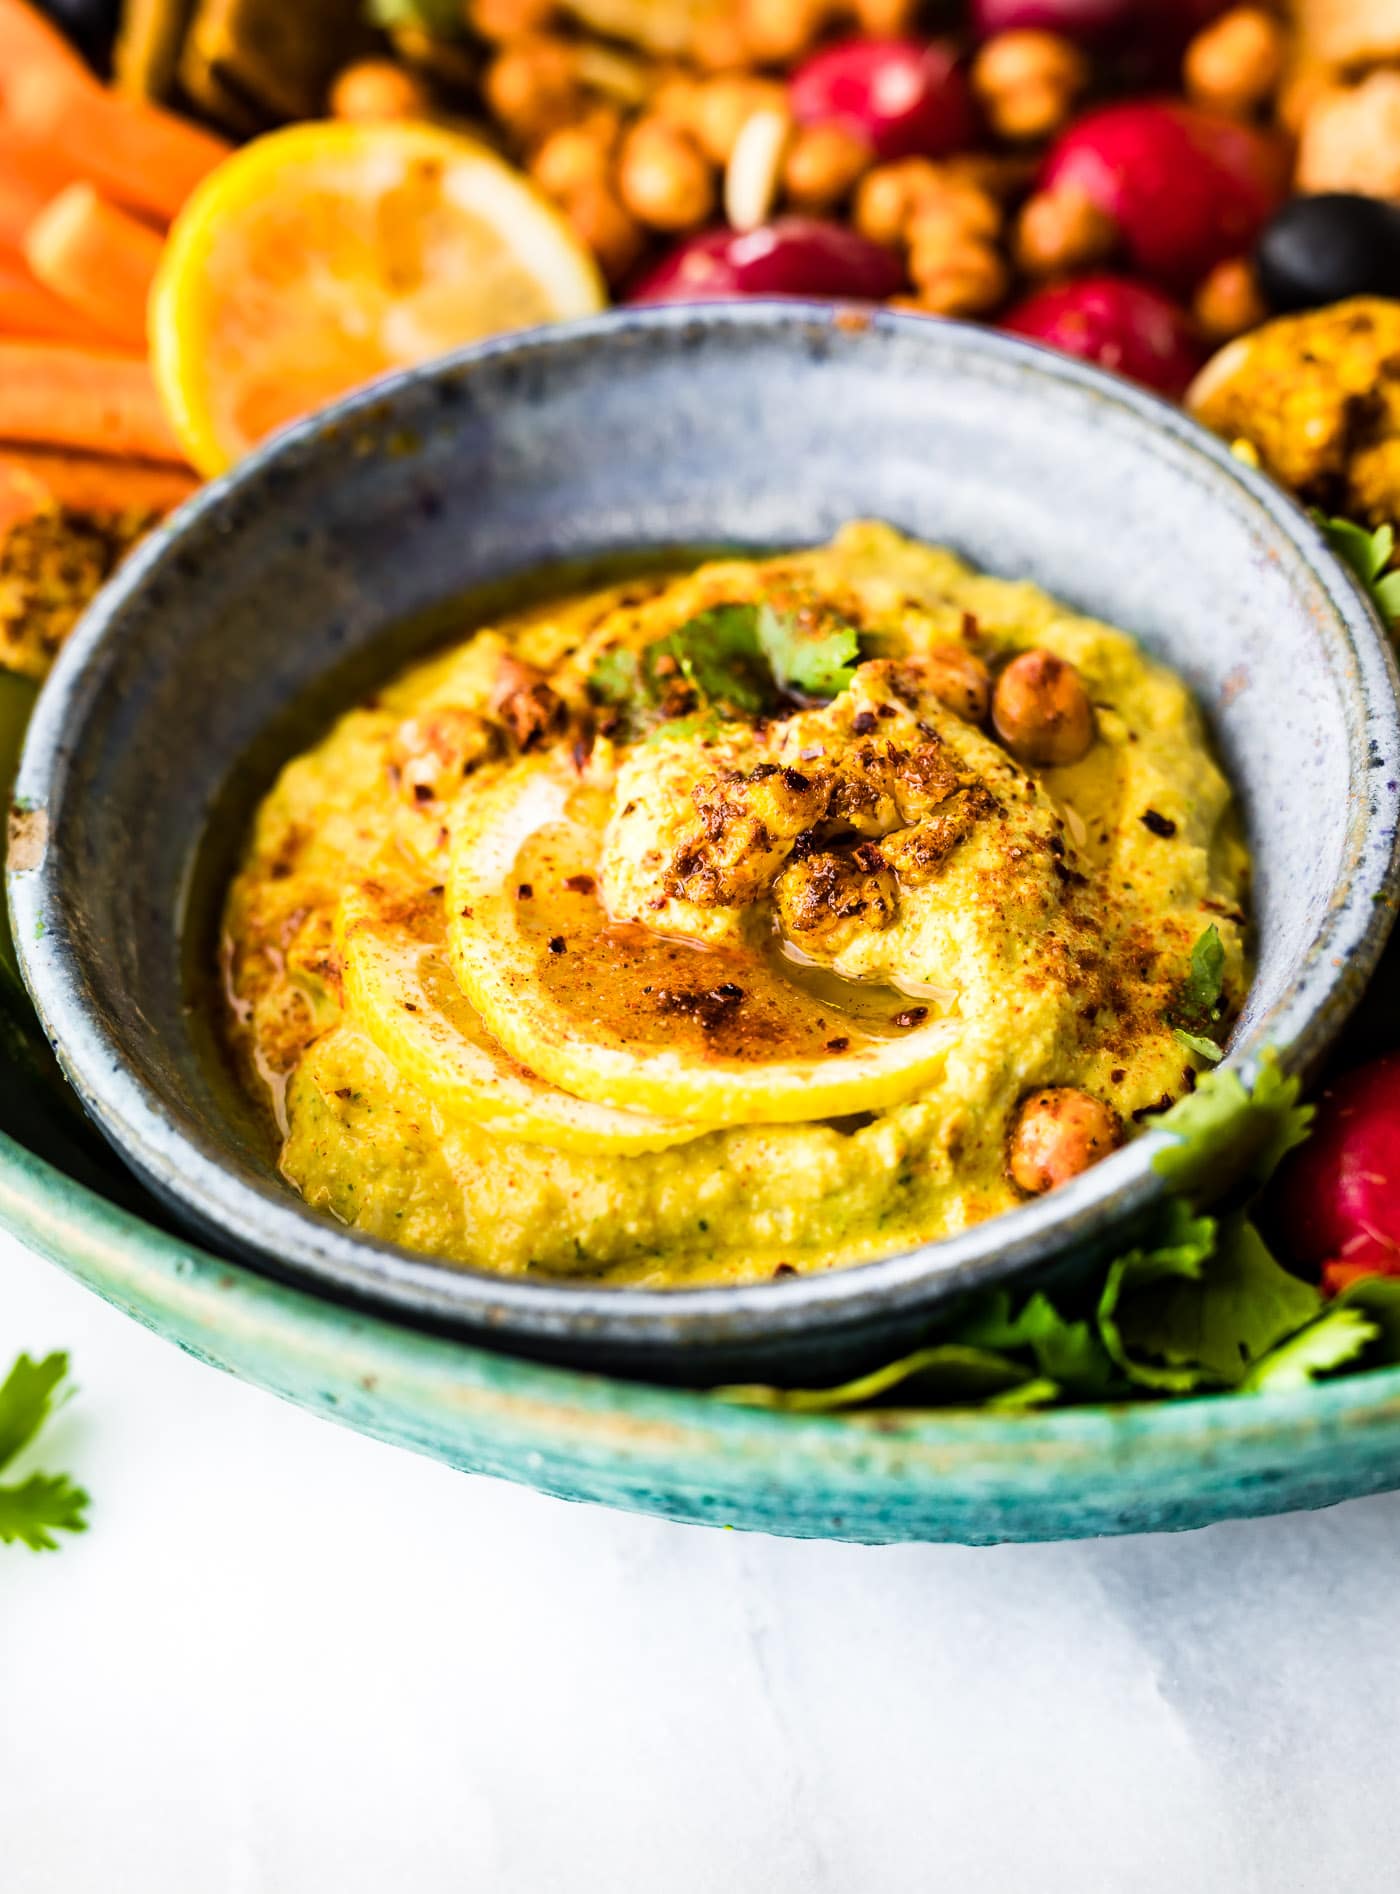 This Tandoori Roasted Cauliflower dip is a flavorful creamy vegetable dip that is perfect for snacking, appetizers, or small plates. Greek yogurt, homemade tandoori seasoning, roasted cauliflower, and parmesan make this dip filling and healthy!